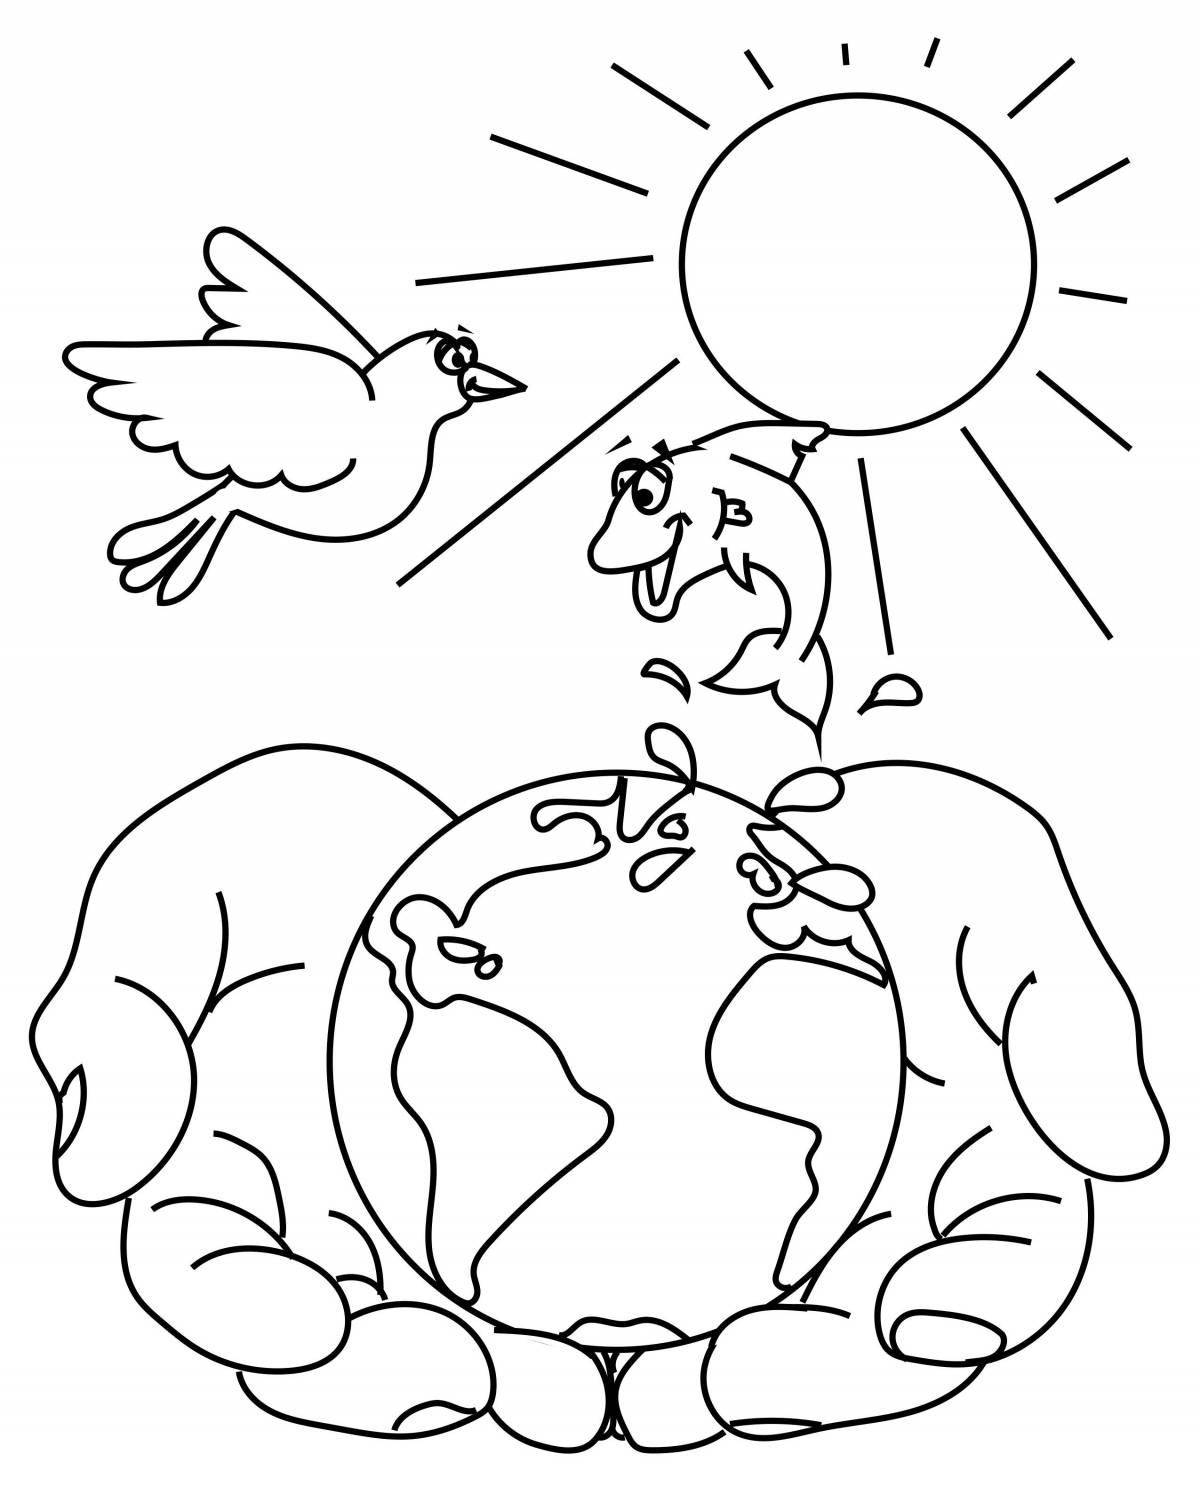 Coloring page gorgeous world on earth